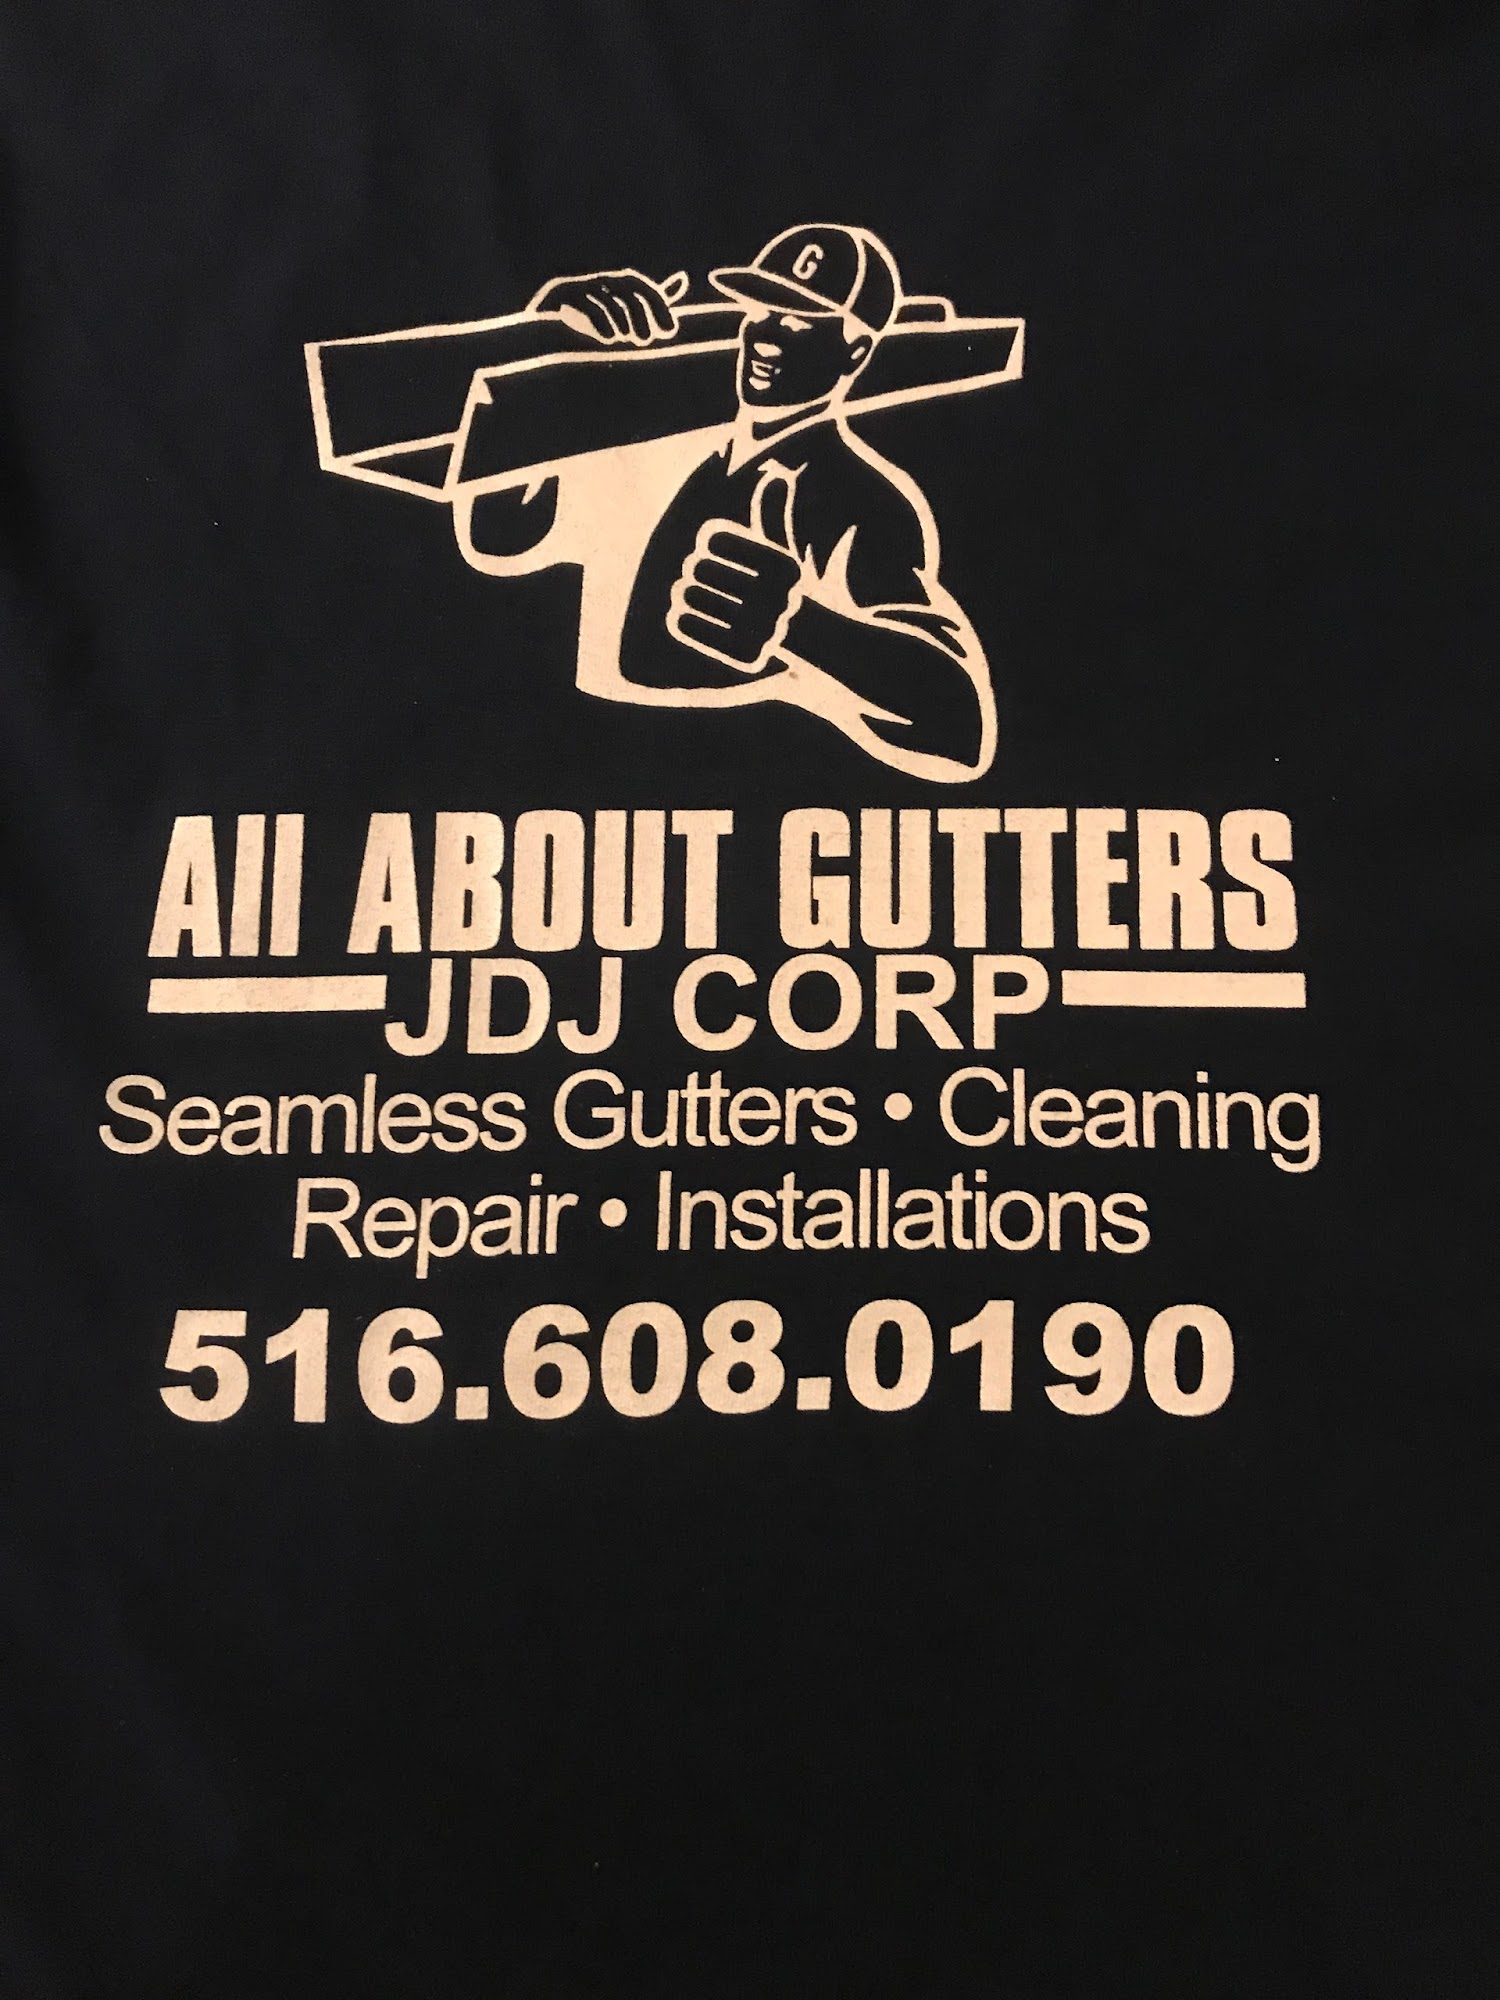 All about Gutters JDJ corp 154 Allers Blvd, Roosevelt New York 11575